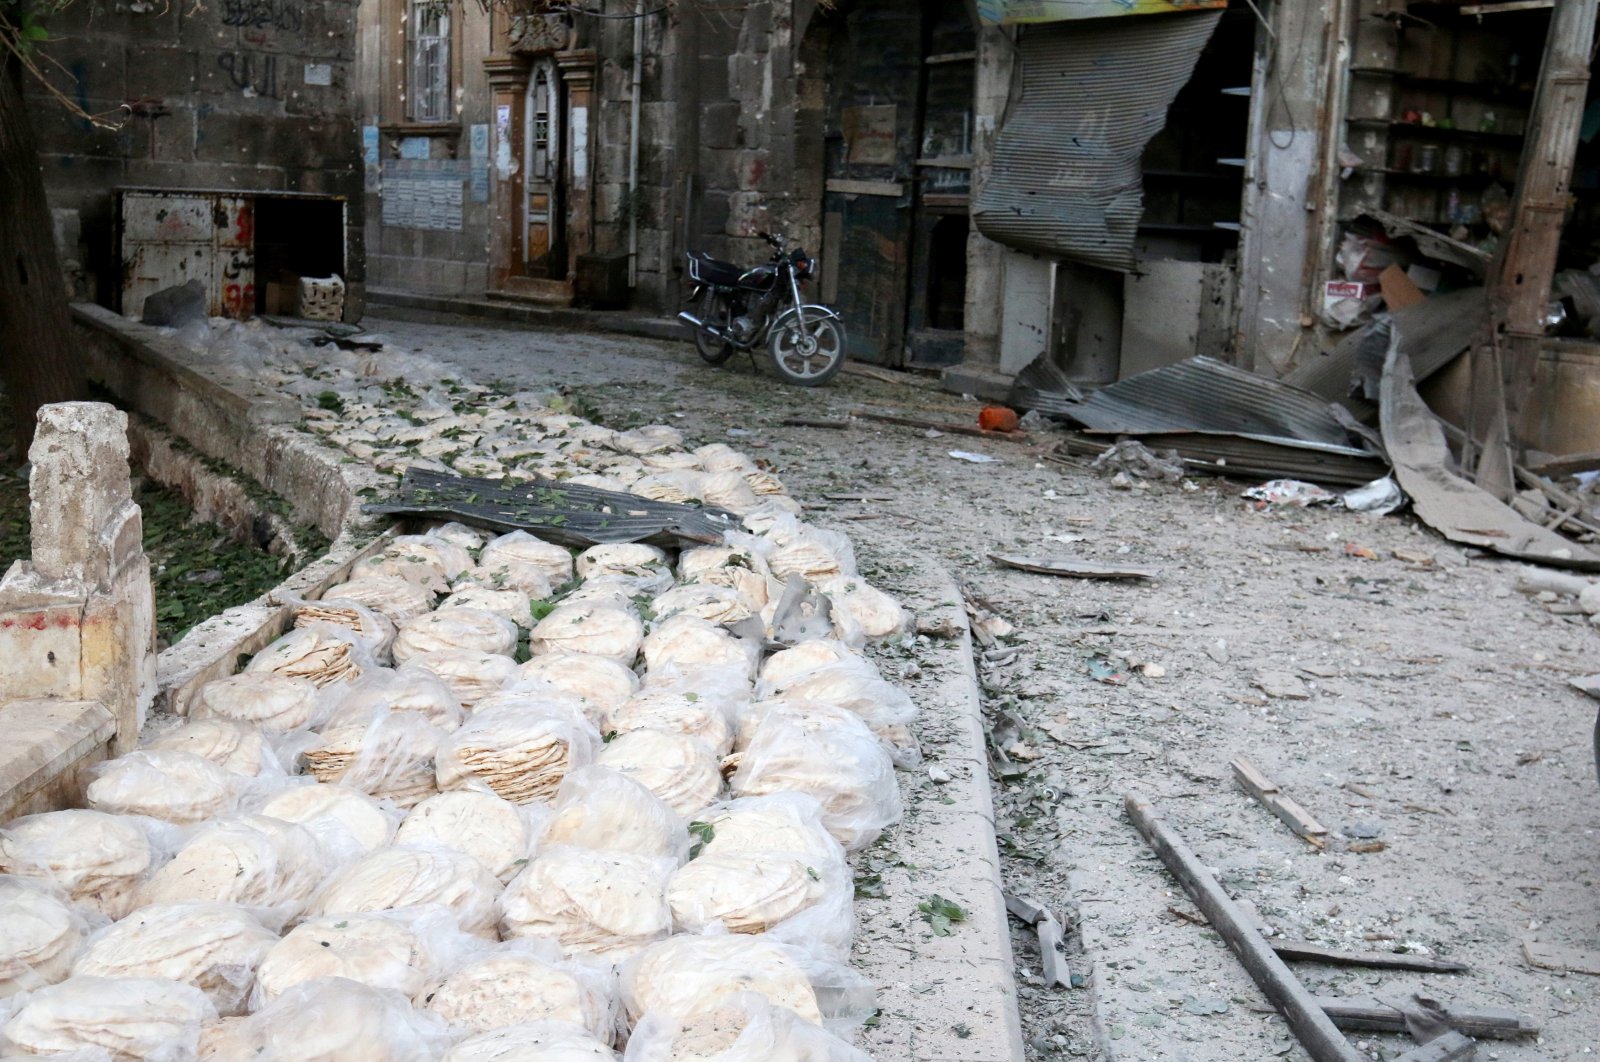 Stacks of bread are seen at a damaged site after an airstrike in the opposition-held Bab al-Maqam neighborhood of Aleppo, Syria, Sept. 28, 2016. (Reuters Photo)